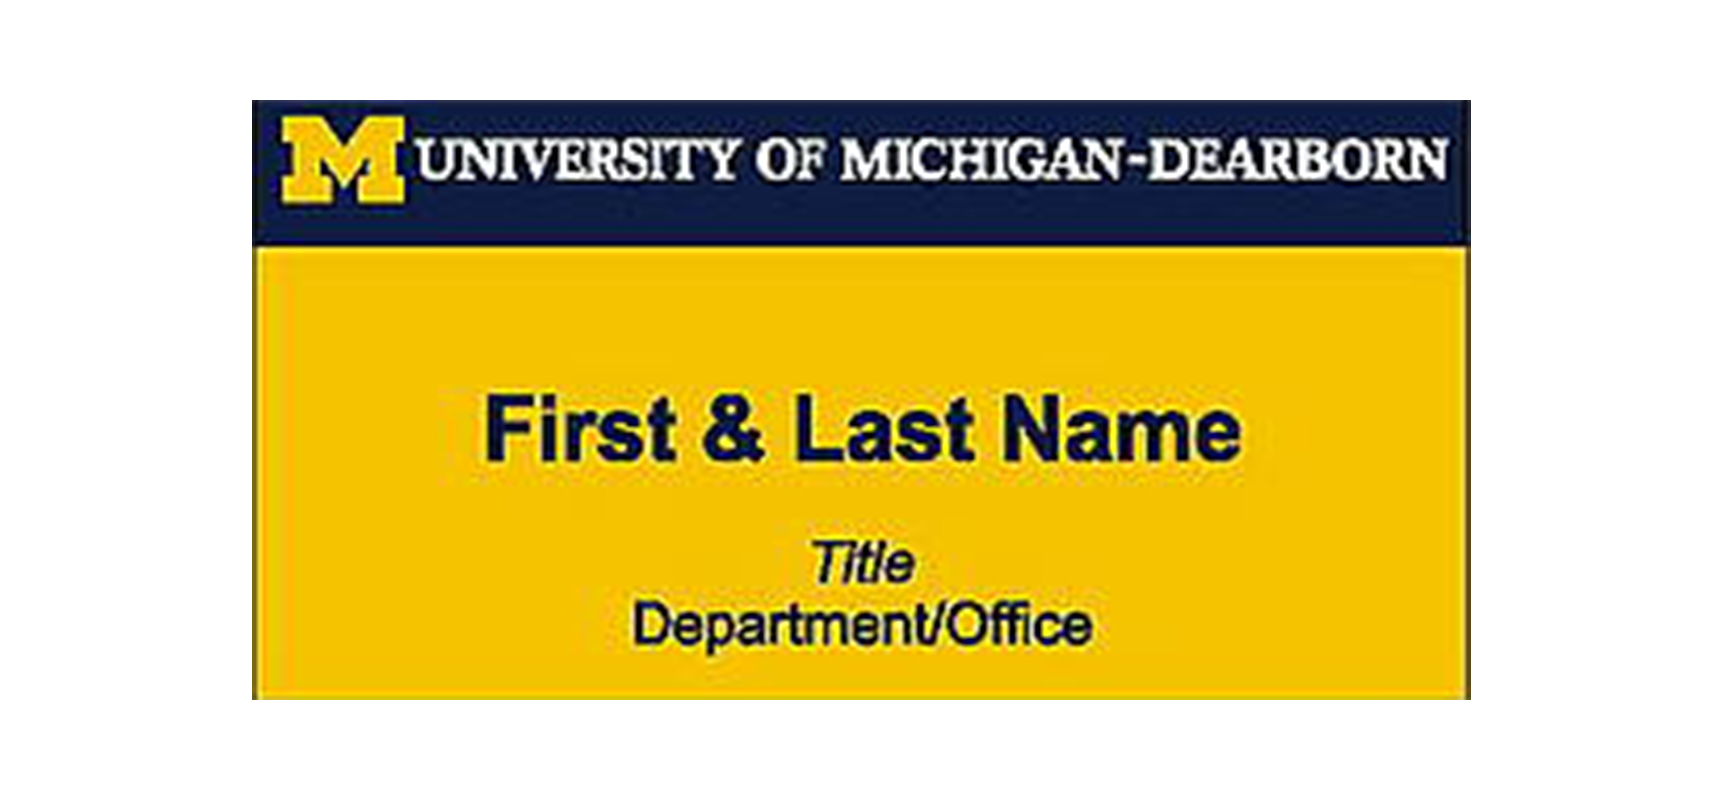 Name tag example showing First & Last, Title, Department/Office